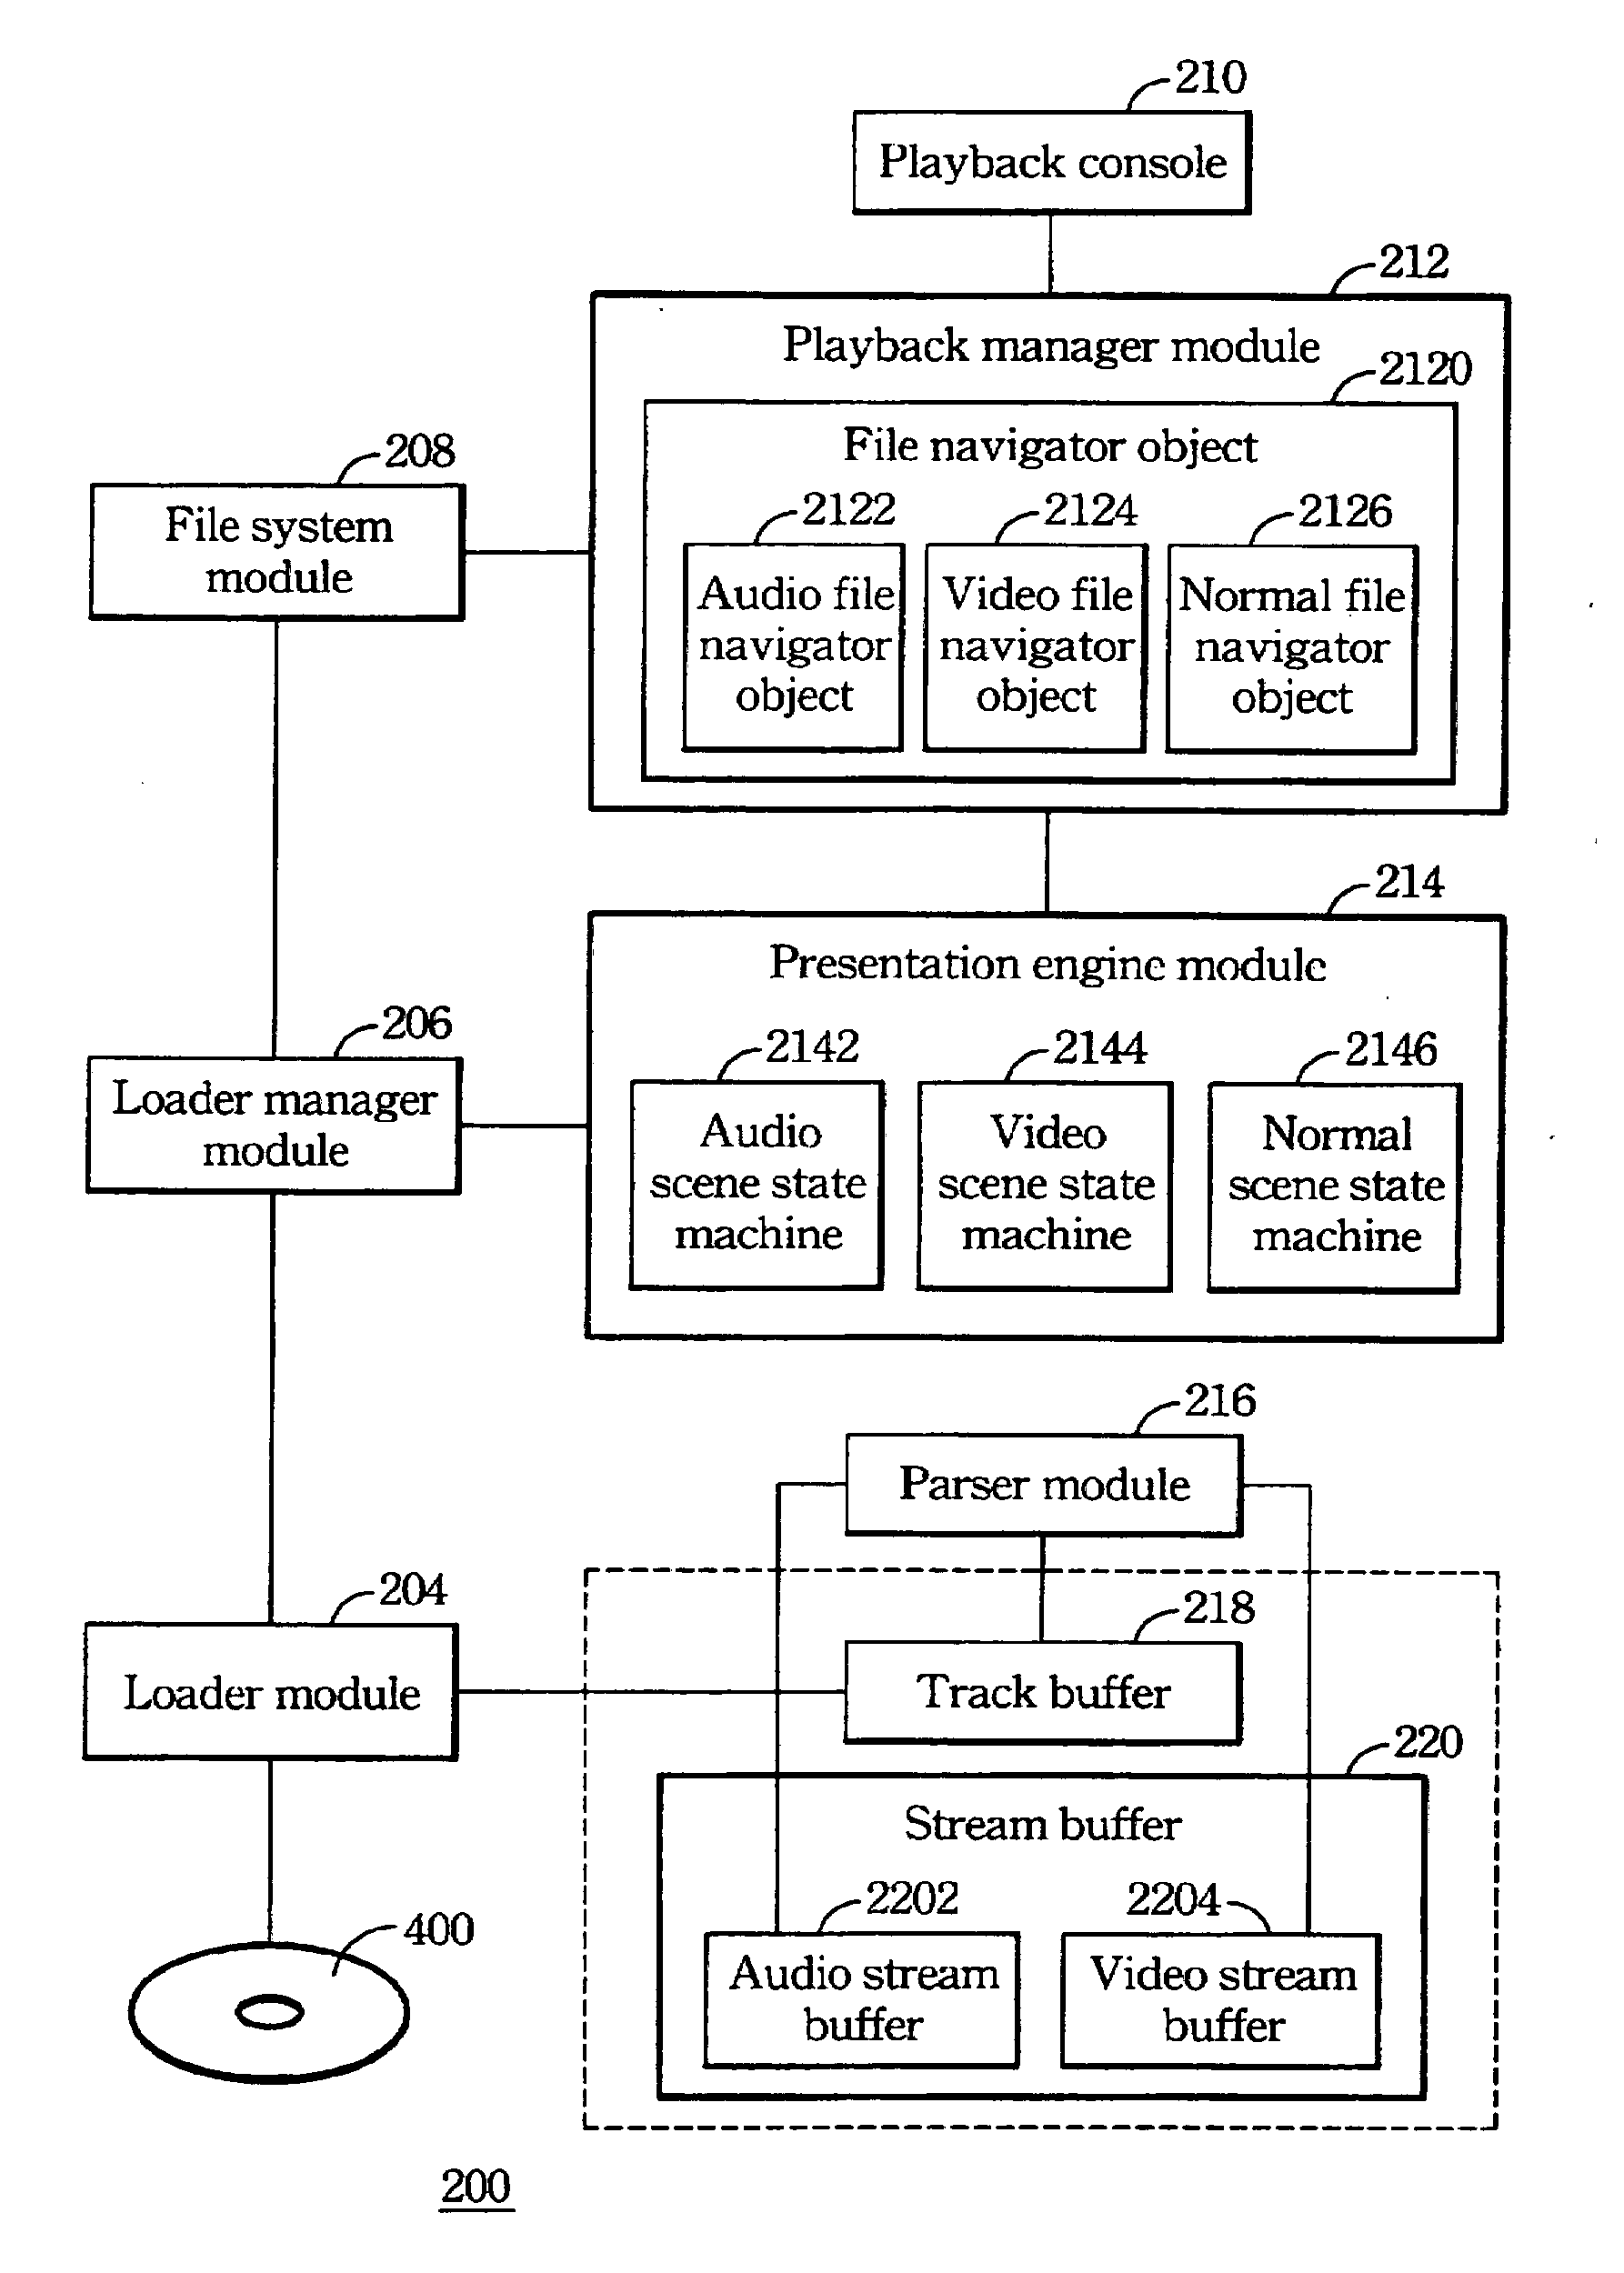 Method of preventing audio or video from interruption due to the other for a mix mode multimedia player